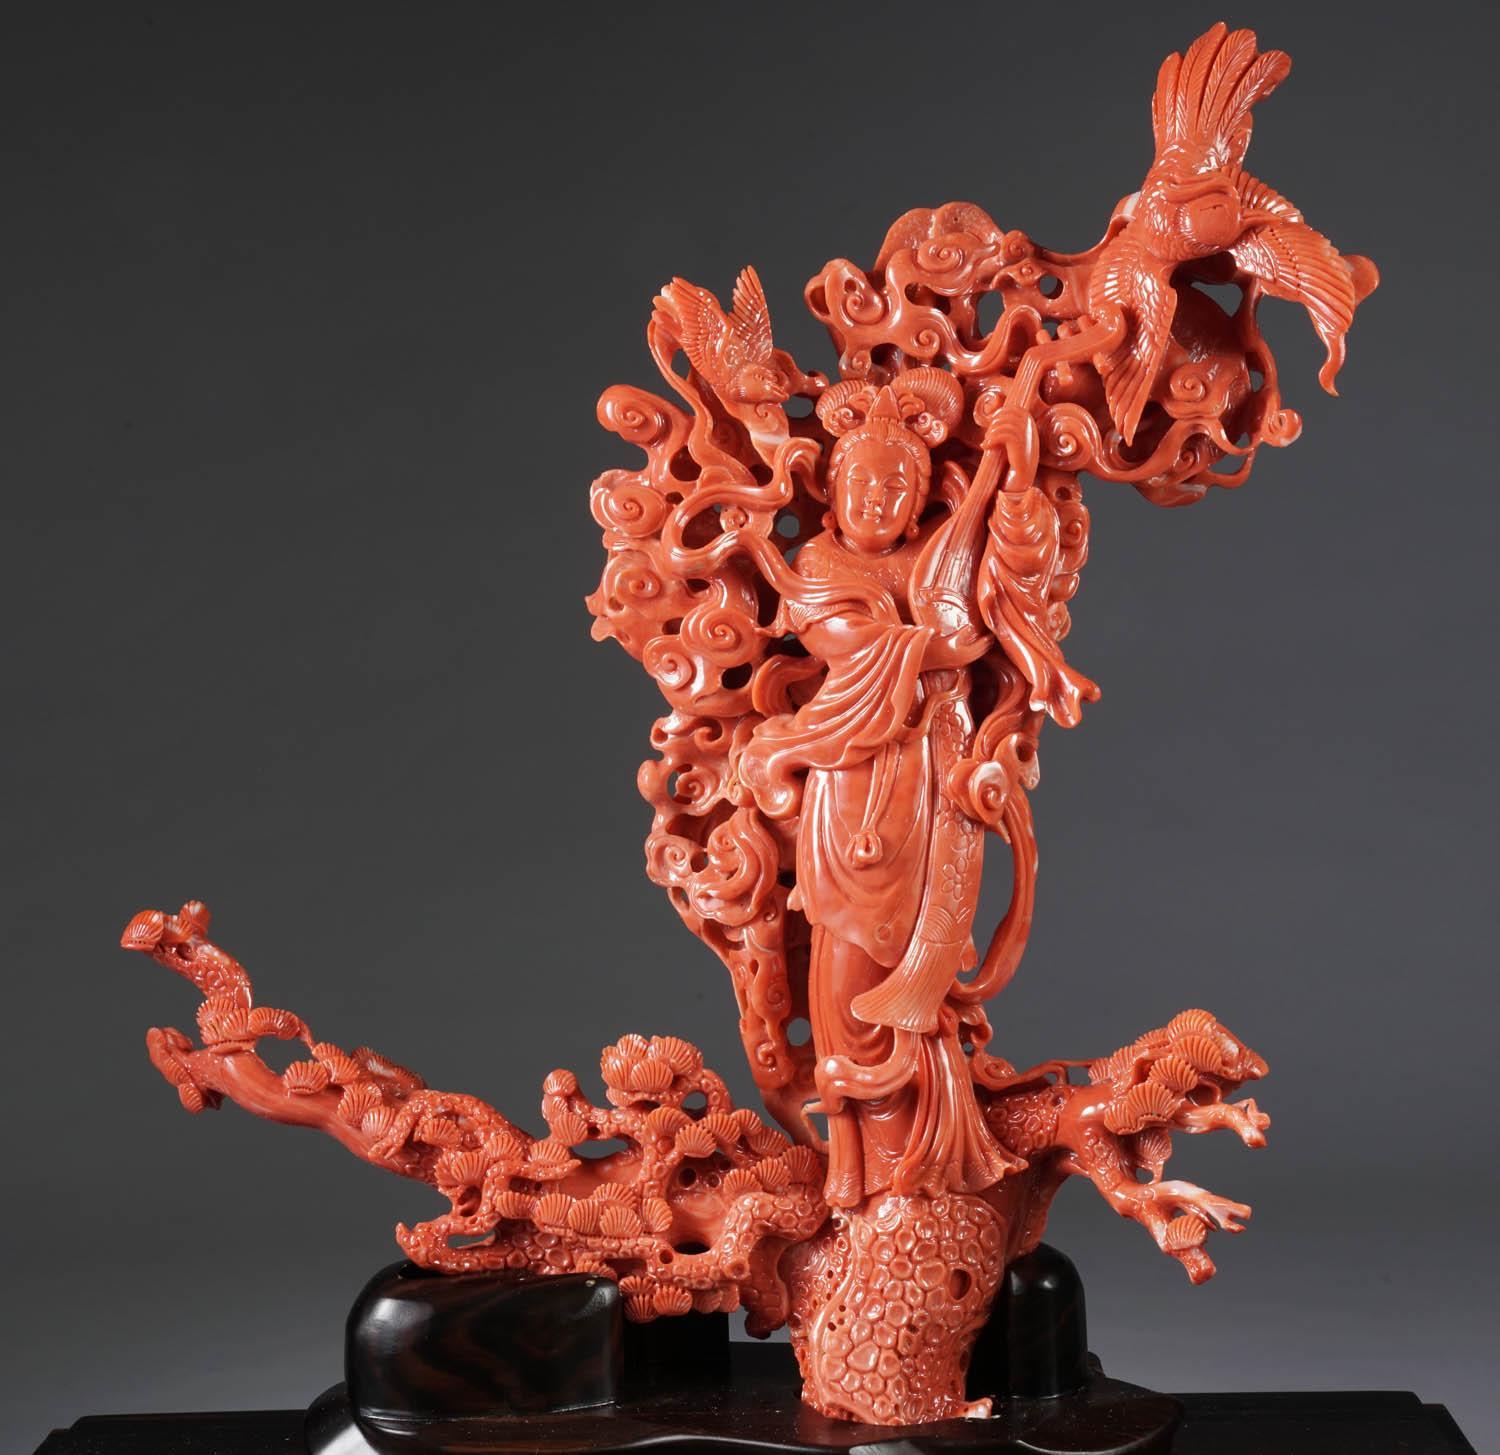 An exceptional Chinese carved coral figural group of a Guanyin, Kwan Yin with a Phoenix.

Very finely carved. In a custom made glass and wooden museum case. The coral has a nice, deep-red color.

Coral measures: 13